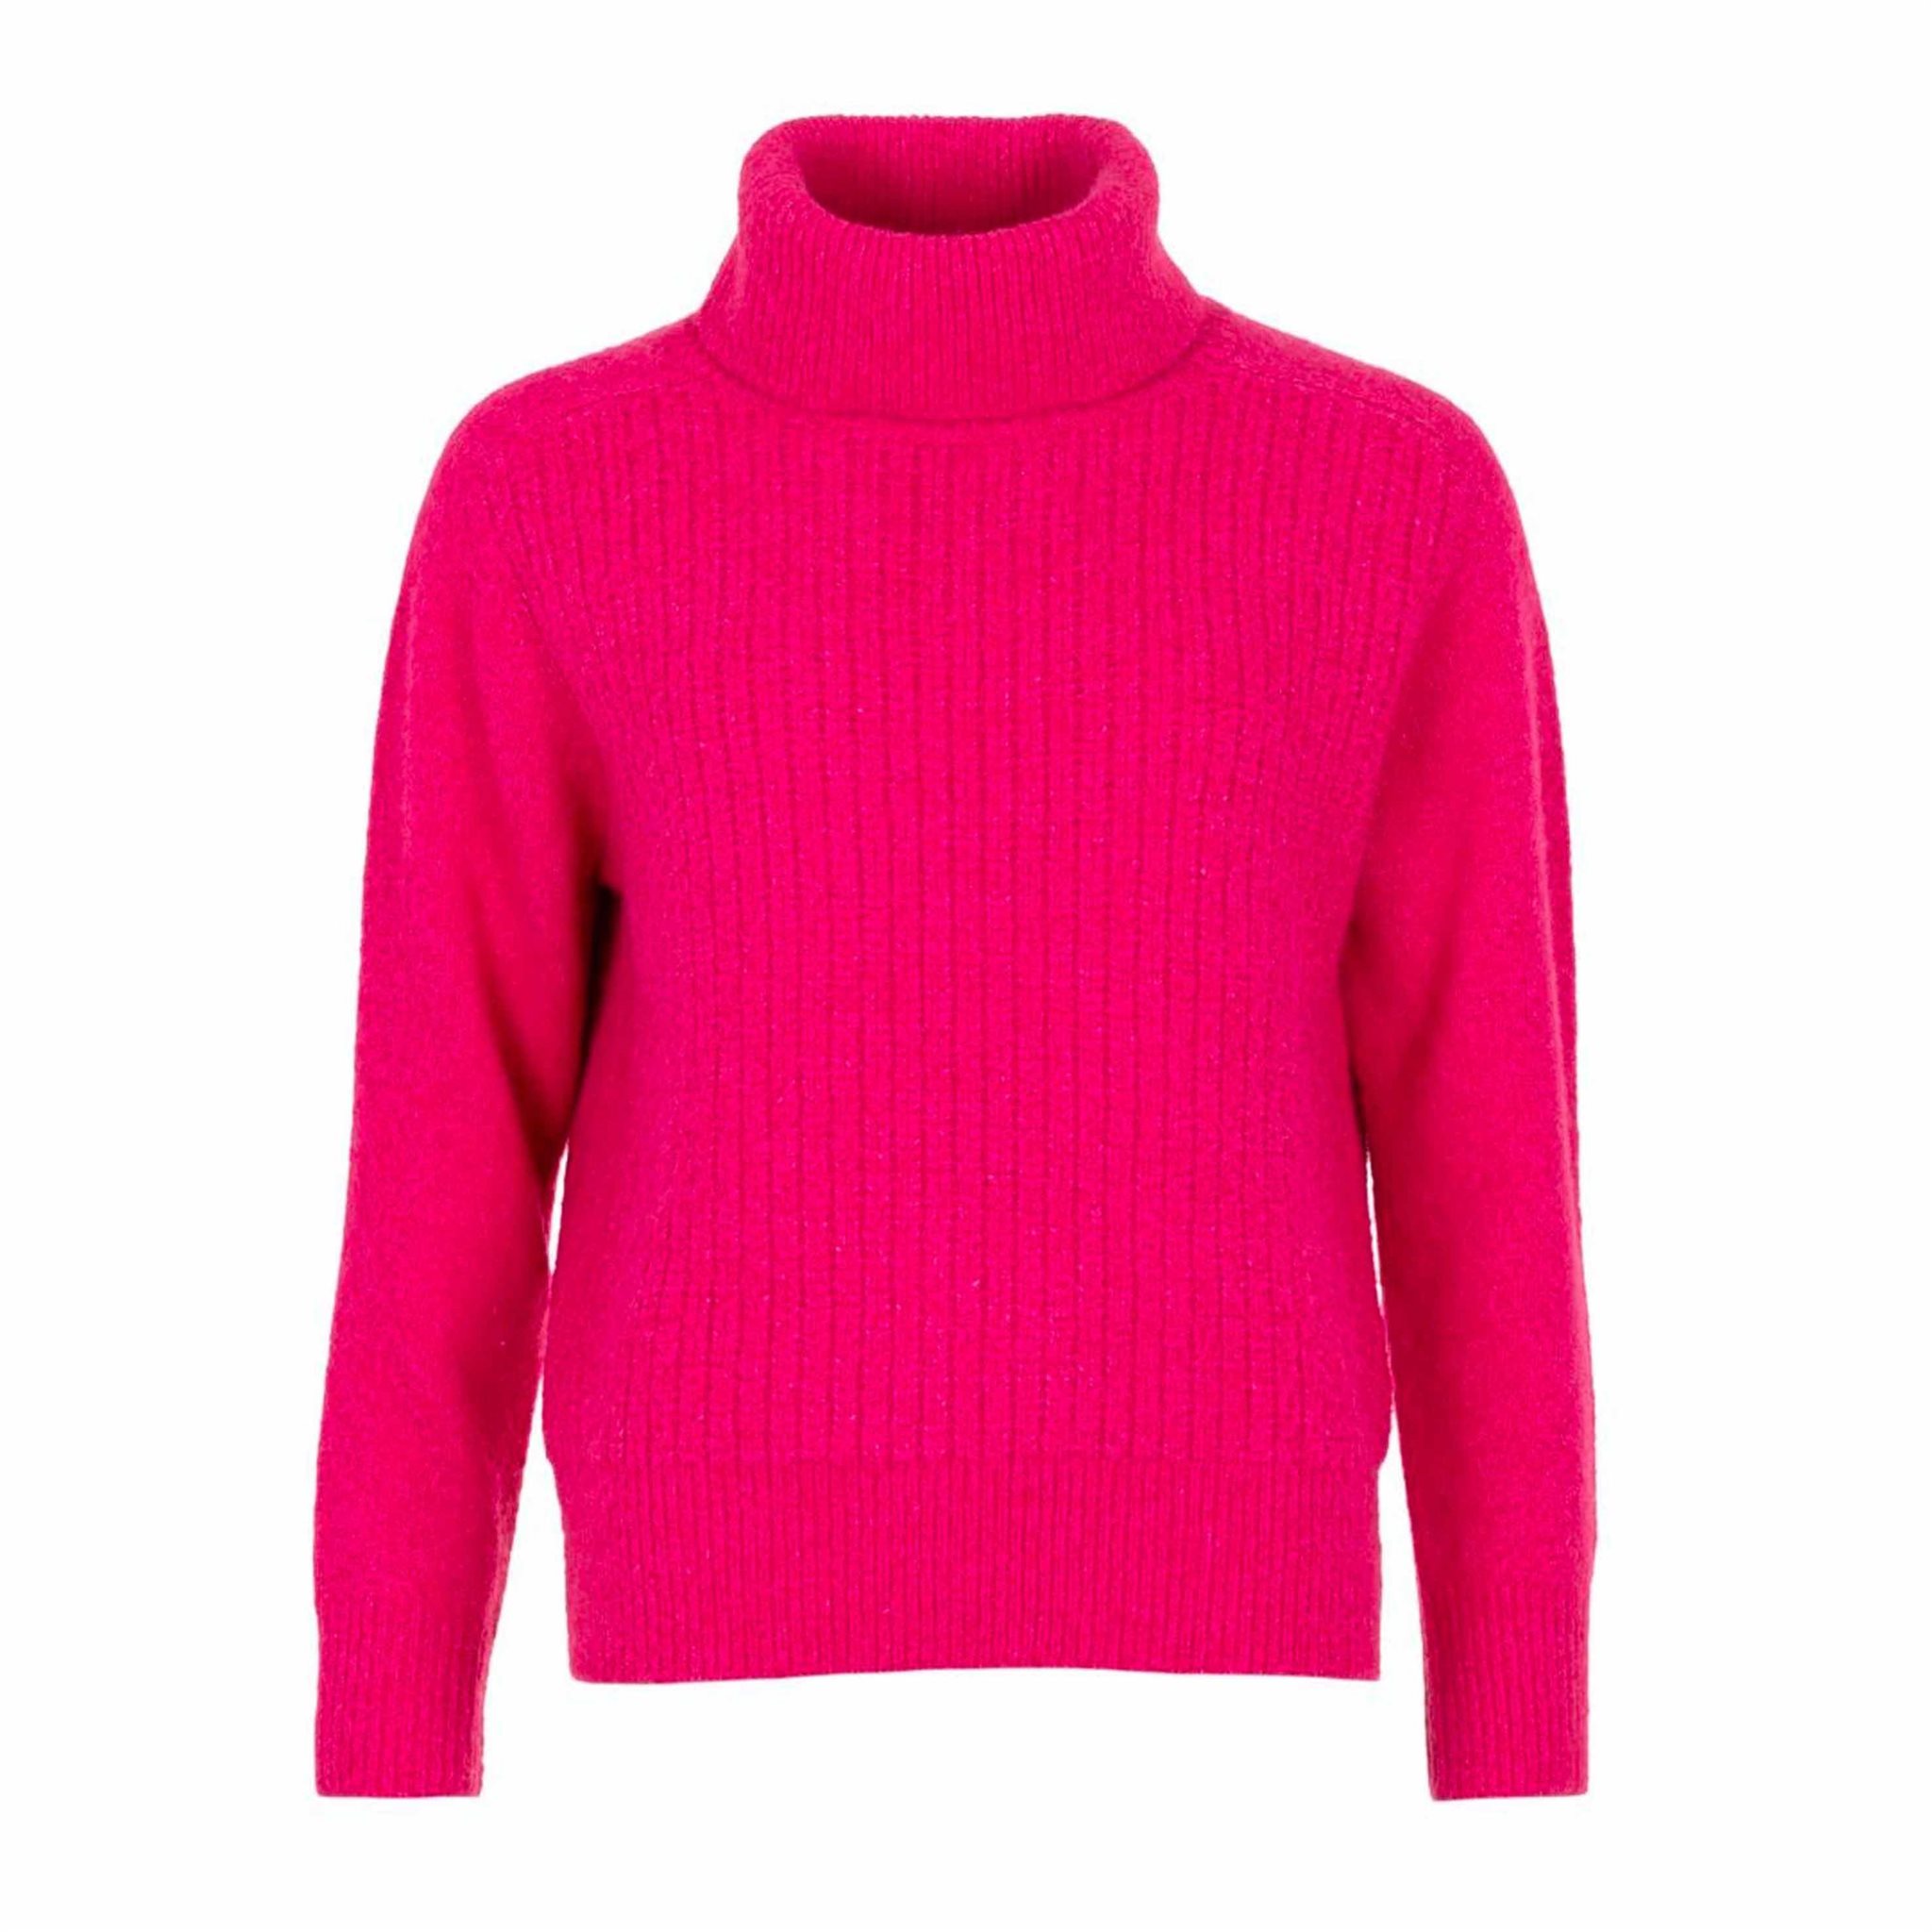 Roll neck pull soft knit UNO DUE